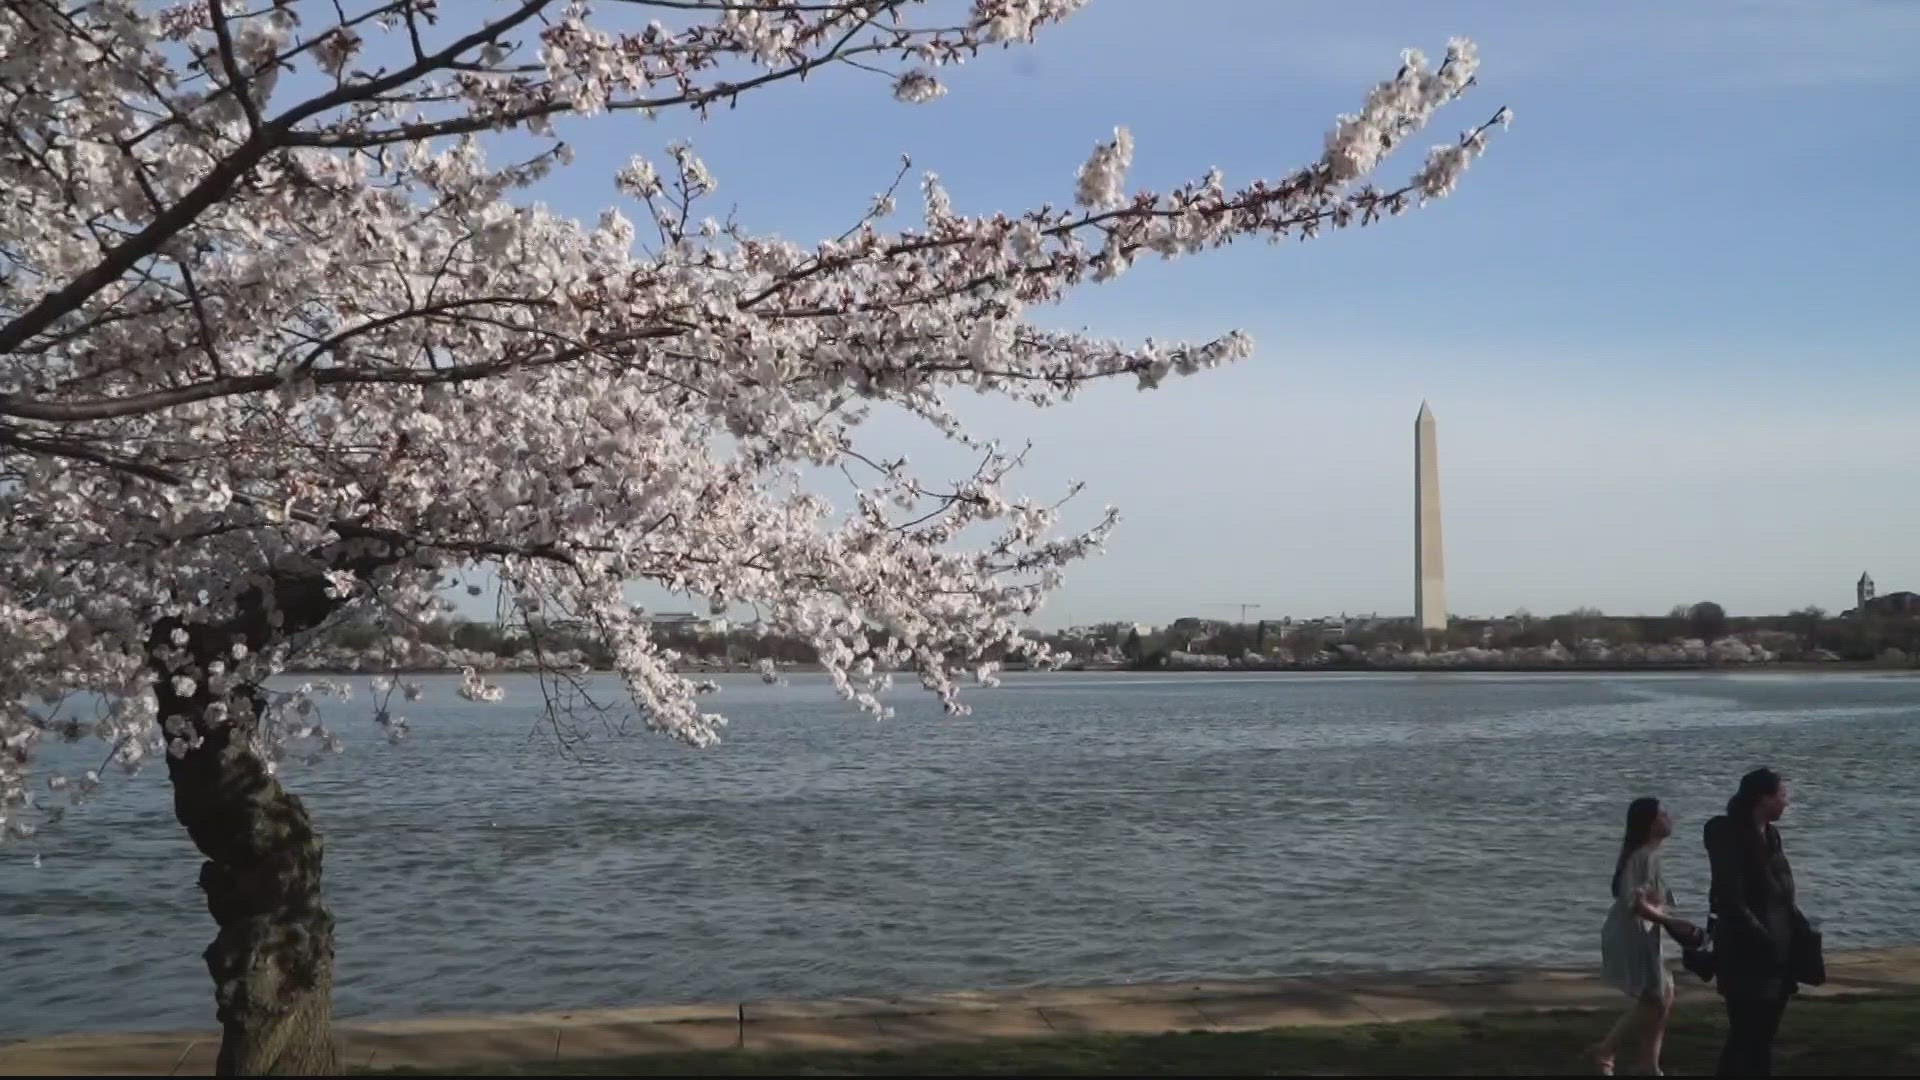 The D.C. cherry blossoms are almost at peak bloom, hitting stage 5 on Saturday, March 18.